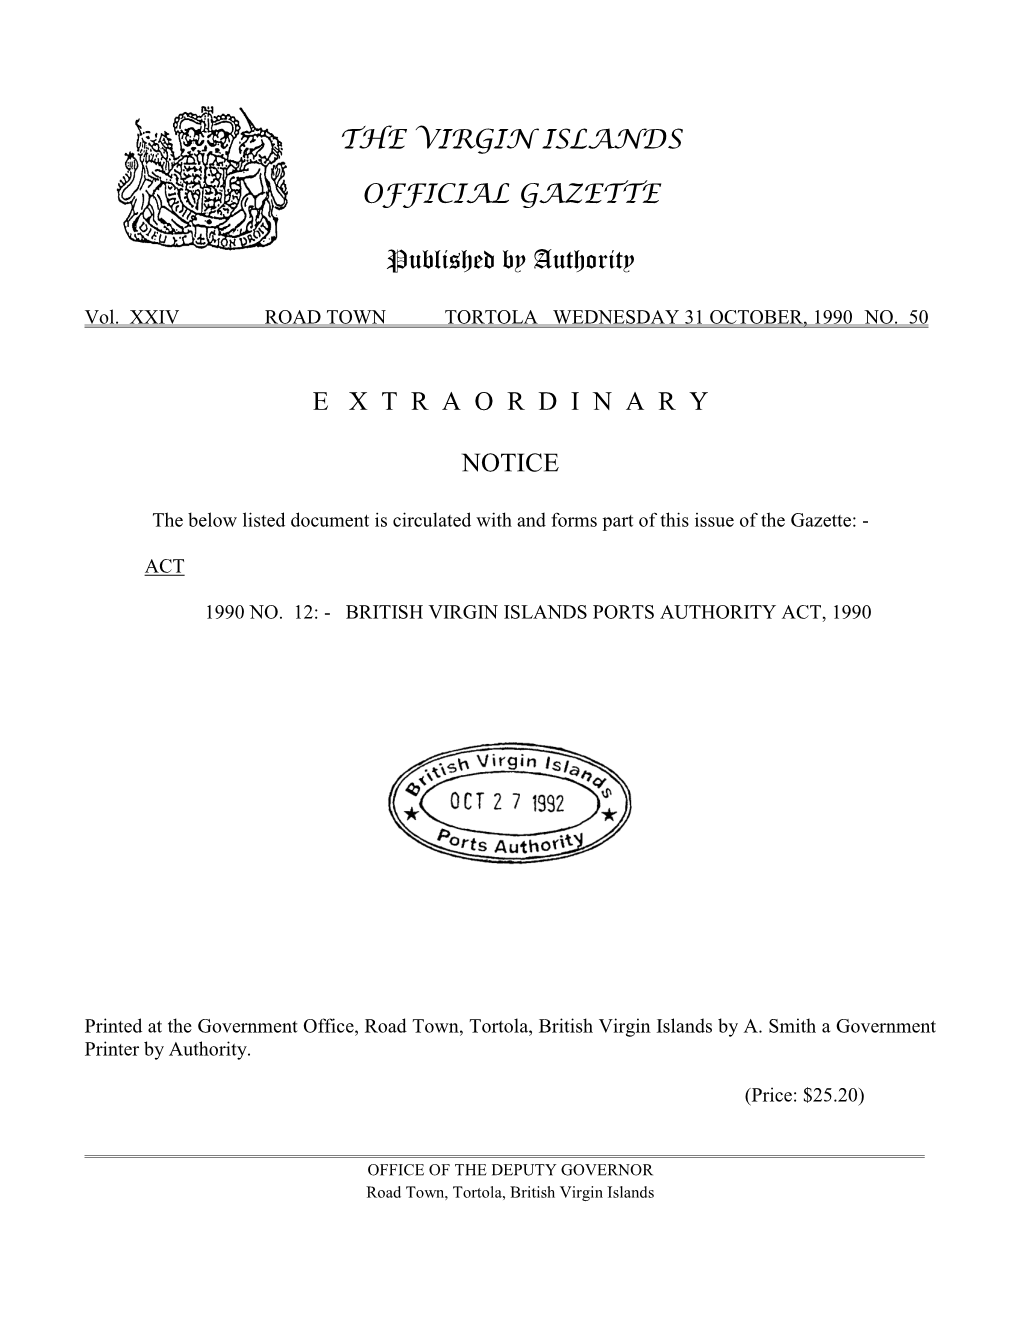 THE VIRGIN ISLANDS OFFICIAL GAZETTE Published by Authority